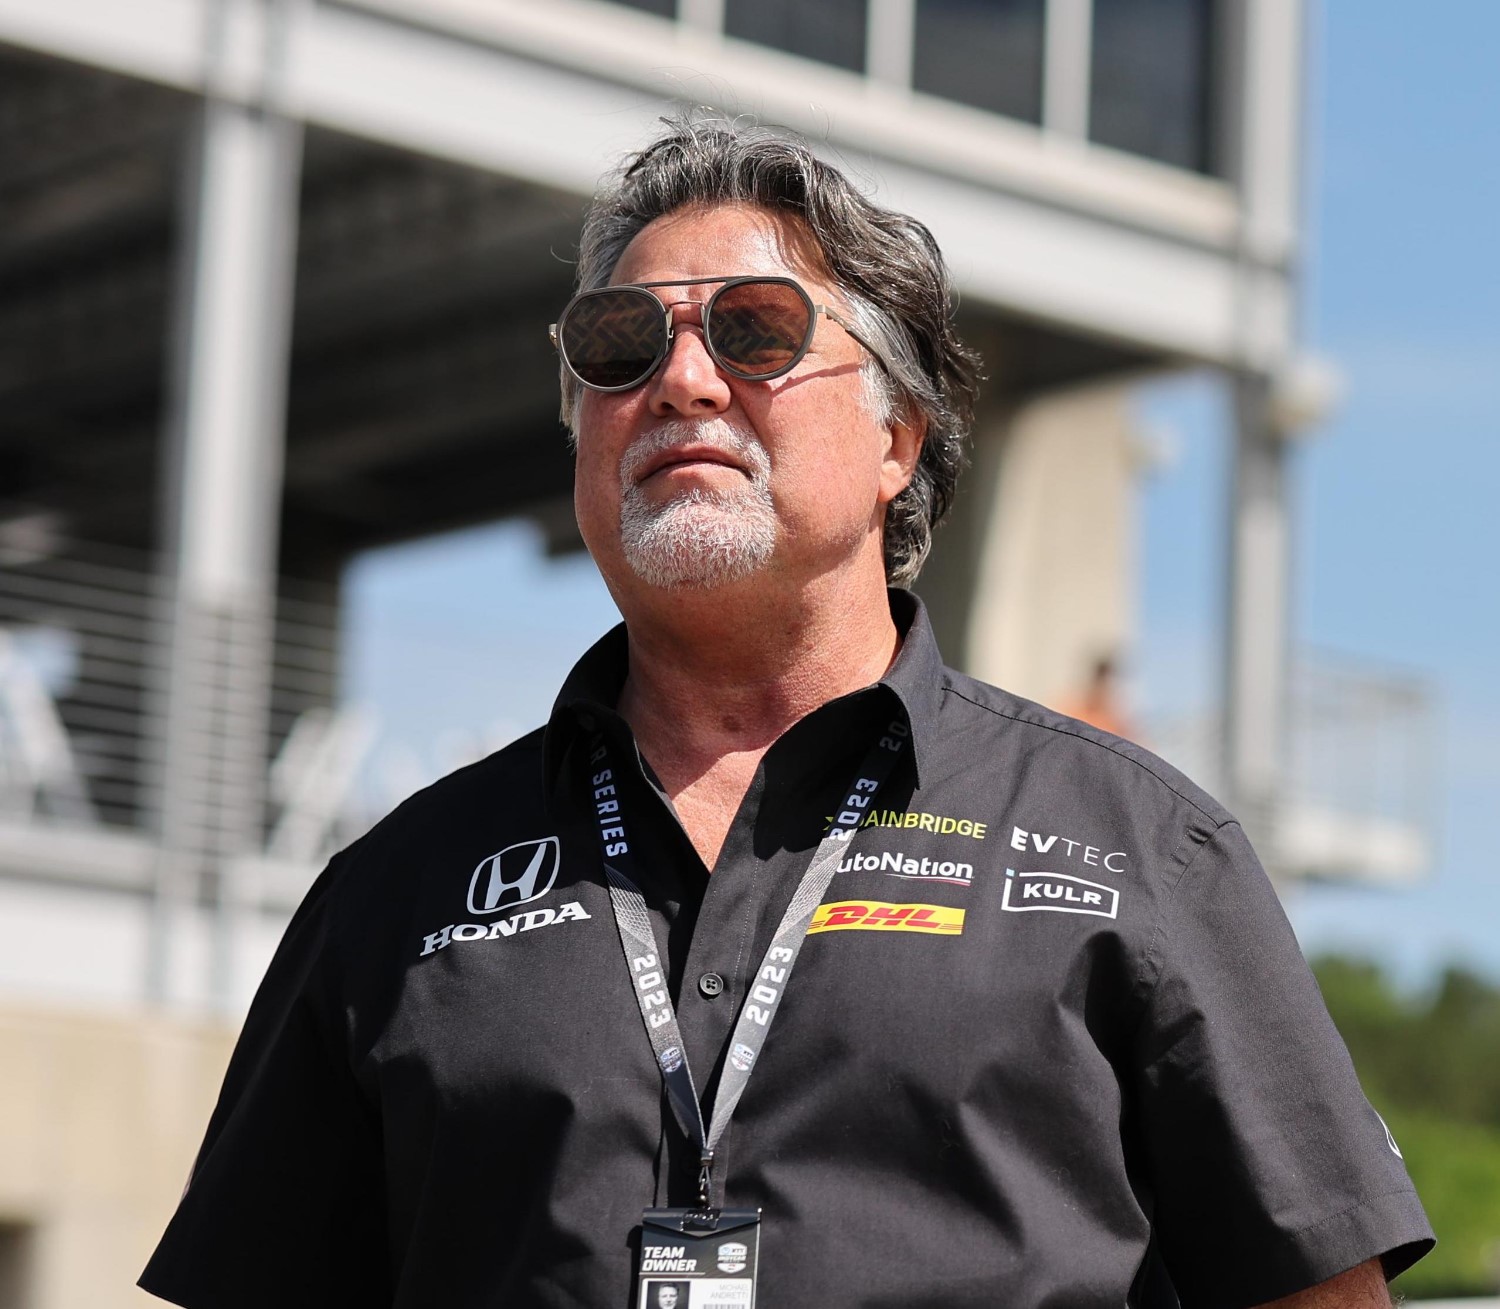 F1 News: With Andretti approval imminent, Team bosses comment